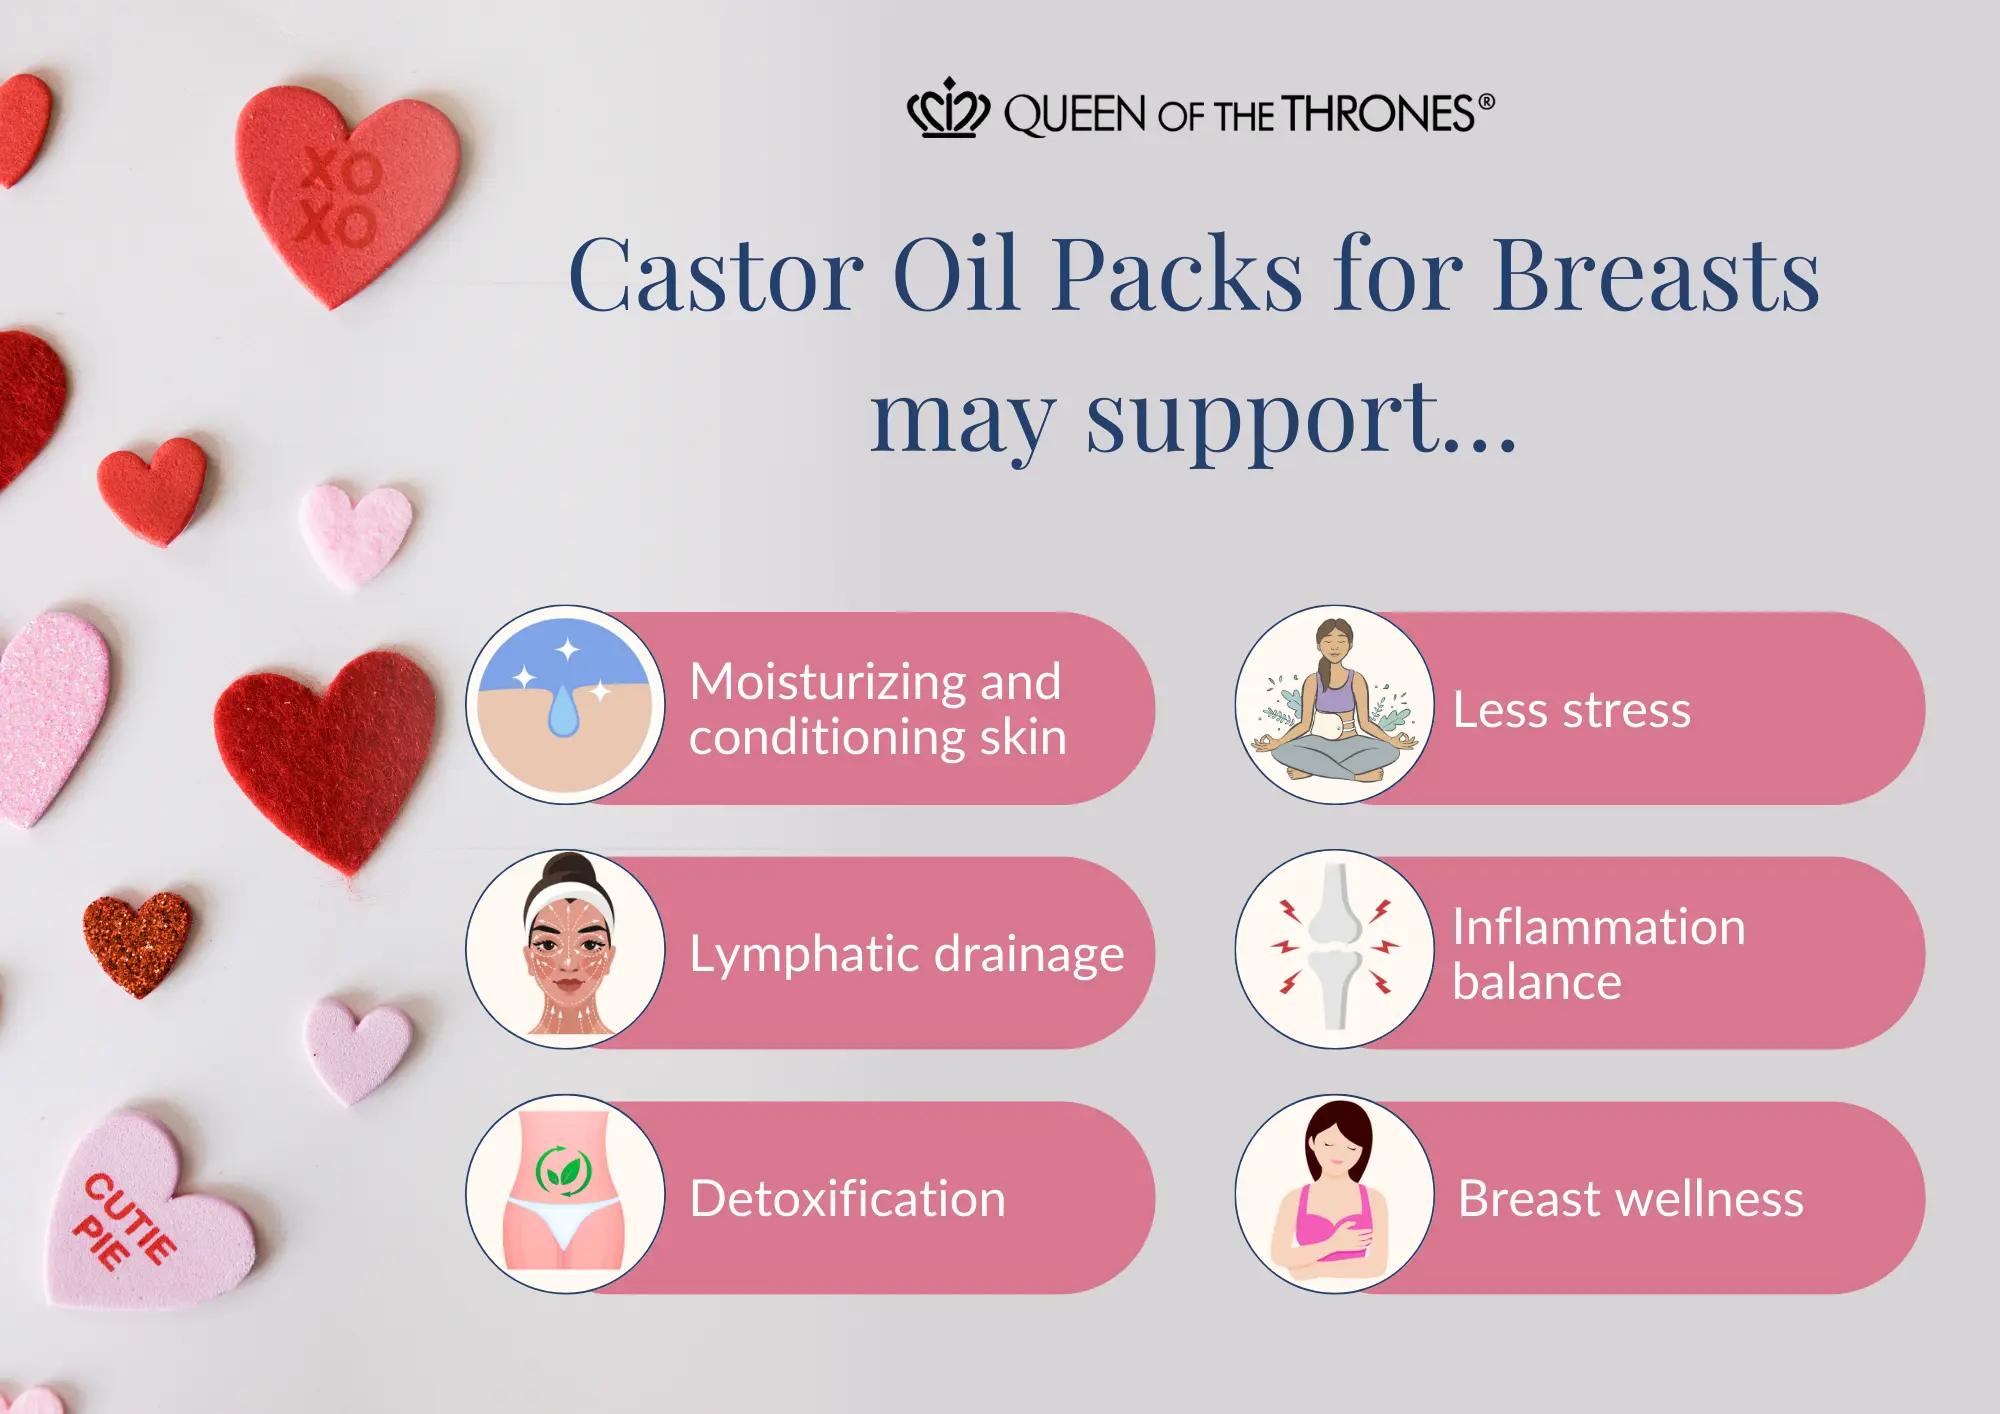 Queen of the Thrones Castor Oil Pack for Breasts Support